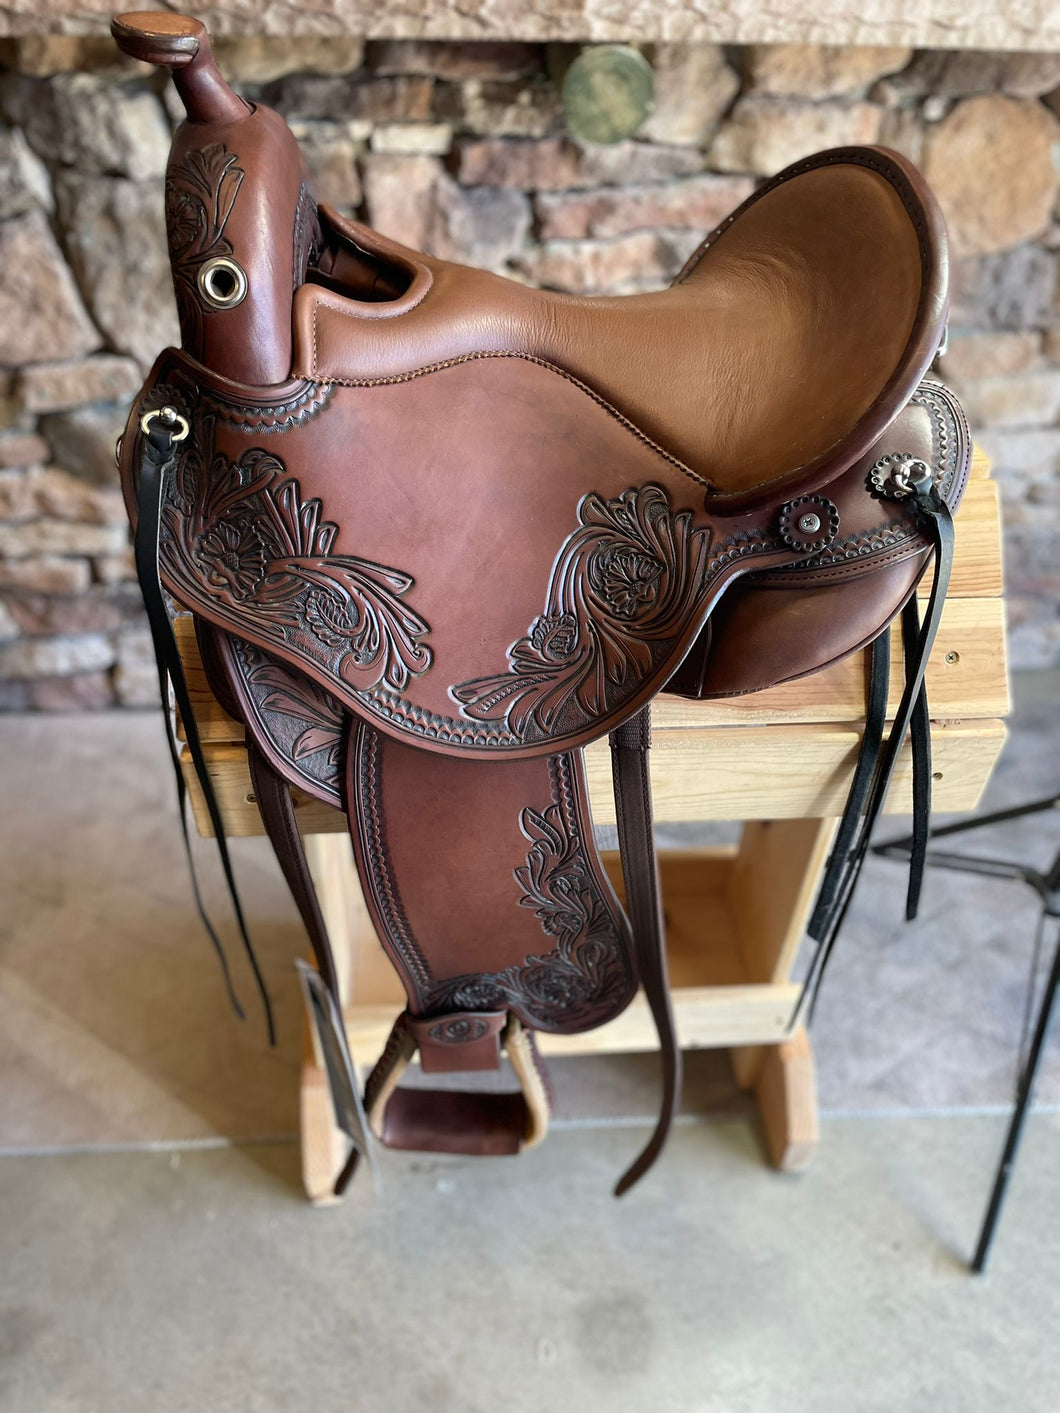 dp saddlery quantum short and light western with a western dressage seat 5313, side view on a wooden saddle rack